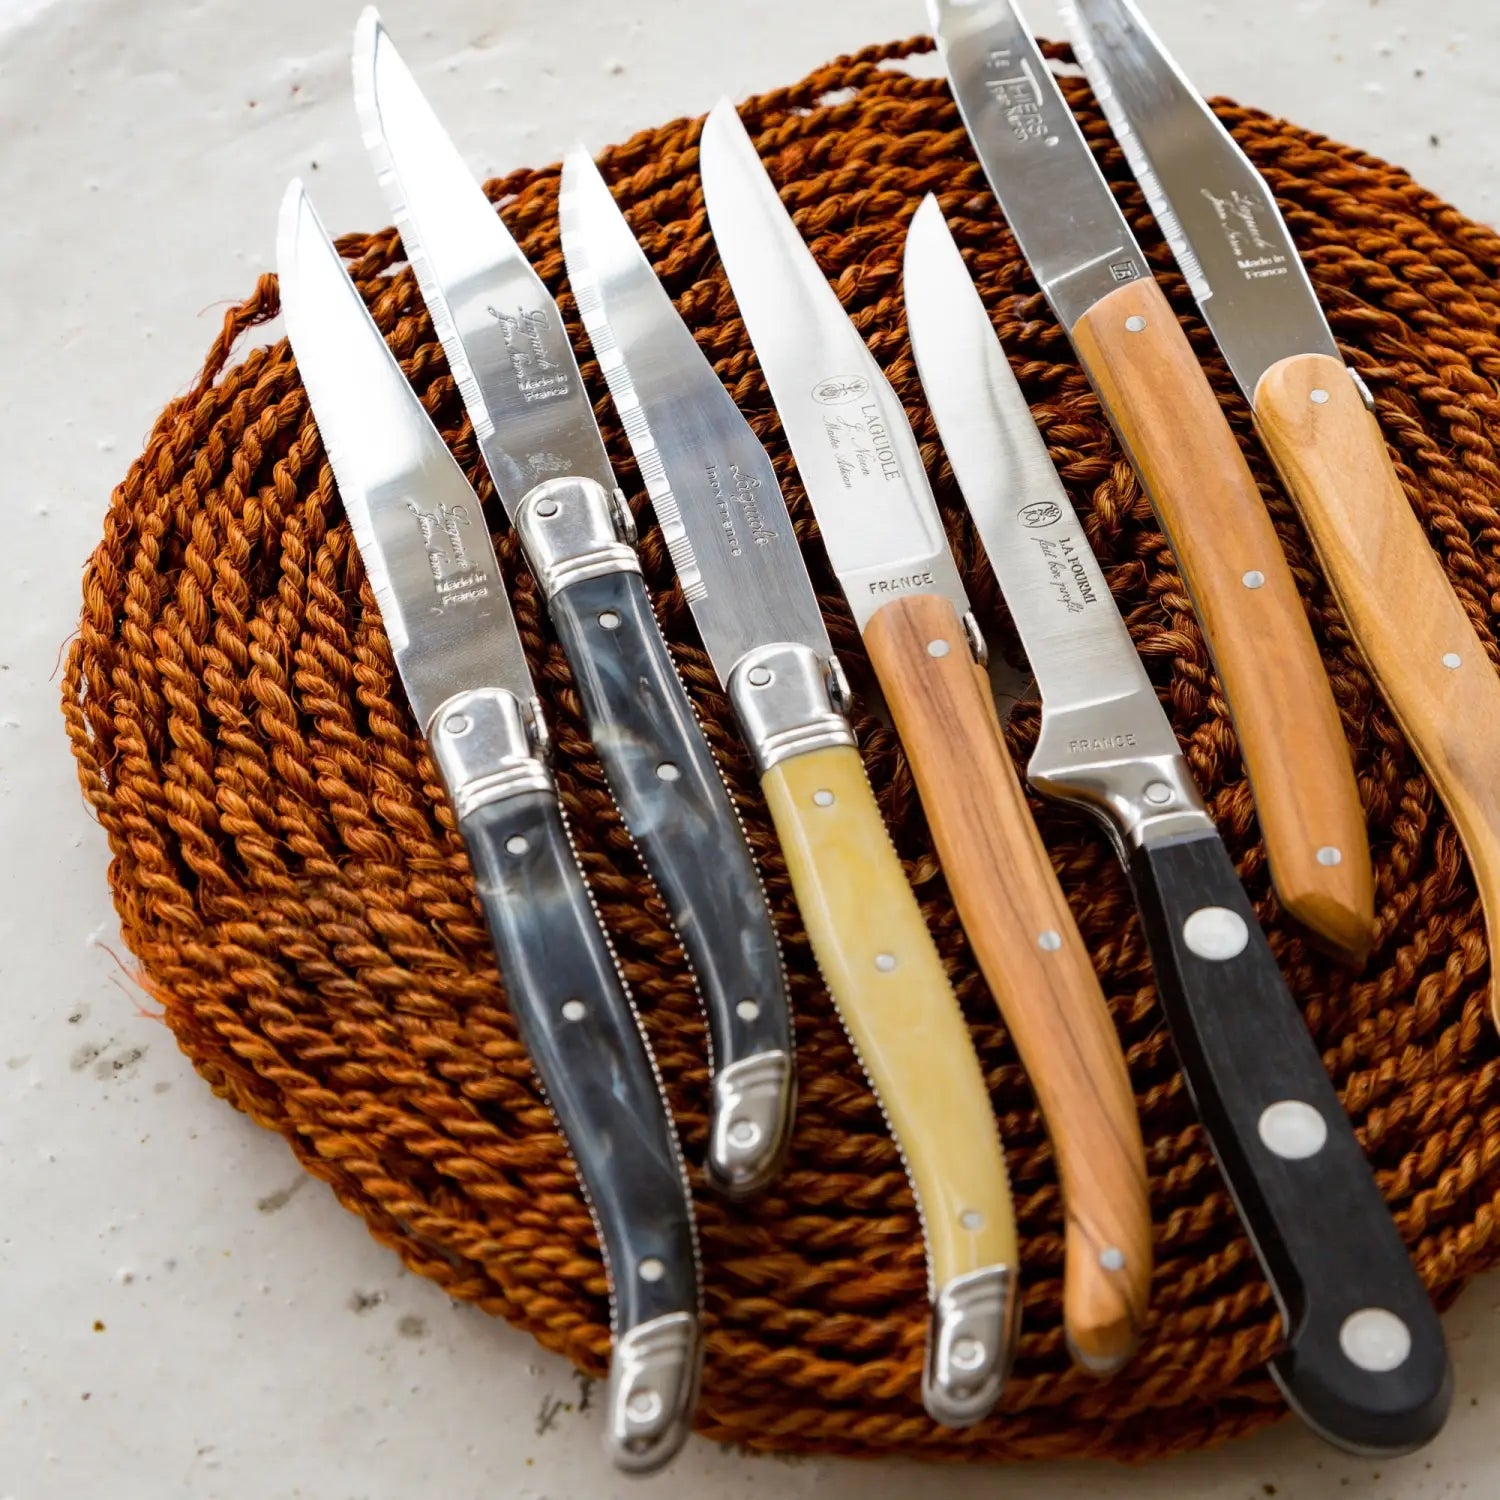 Selection of Laguiole cutlery